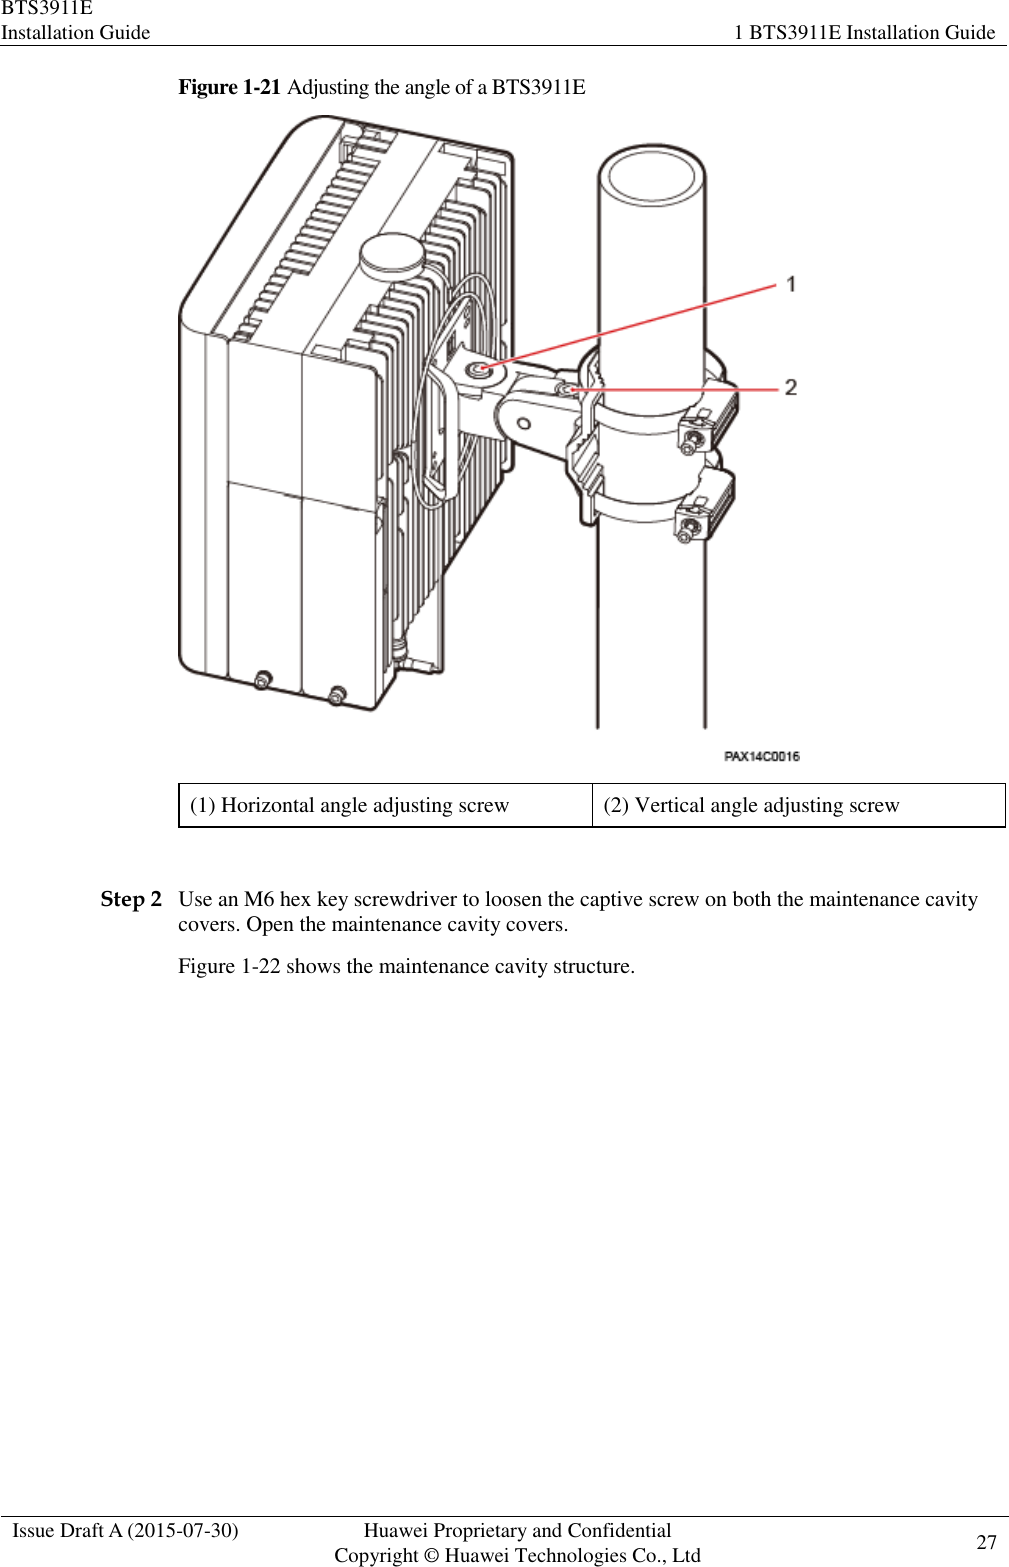 BTS3911E Installation Guide 1 BTS3911E Installation Guide  Issue Draft A (2015-07-30) Huawei Proprietary and Confidential           Copyright © Huawei Technologies Co., Ltd 27    Figure 1-21 Adjusting the angle of a BTS3911E  (1) Horizontal angle adjusting screw (2) Vertical angle adjusting screw  Step 2 Use an M6 hex key screwdriver to loosen the captive screw on both the maintenance cavity covers. Open the maintenance cavity covers. Figure 1-22 shows the maintenance cavity structure. 